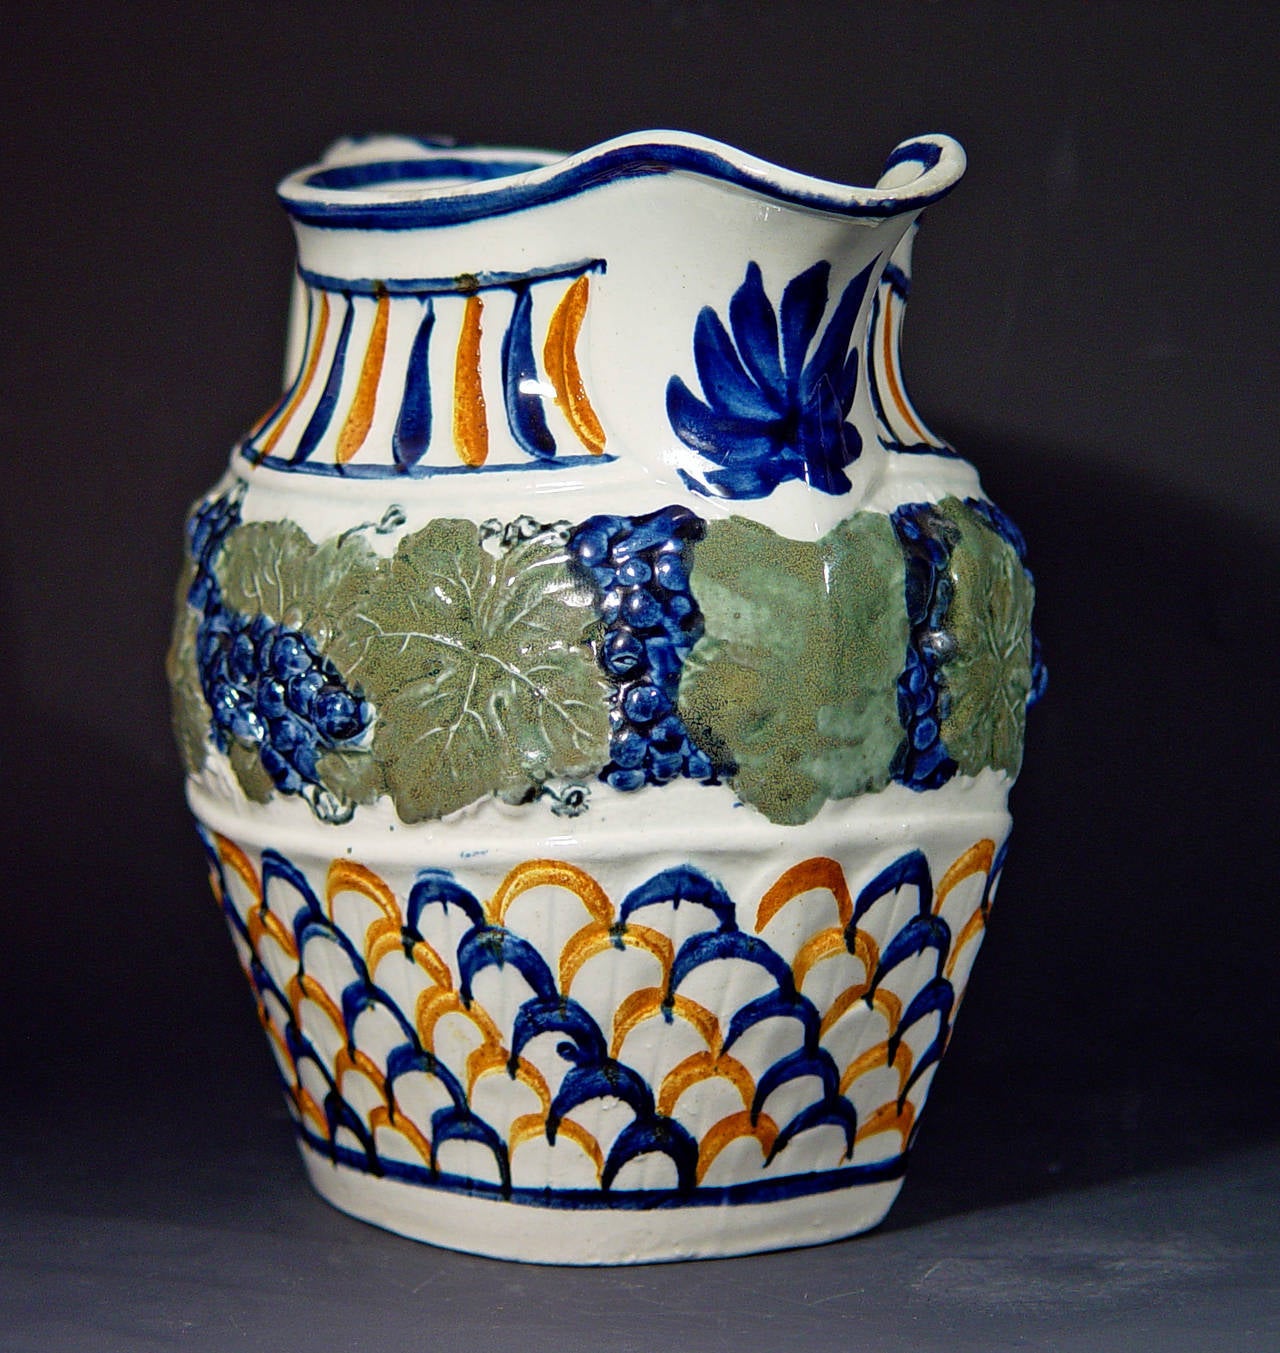 The jug is decorated in a pattern known as Vine & Scale with a moulded design of grapes and grape leaves surrounding the shoulder with a raised fish-scale design below in typical Pratt colors. The rim with an underglaze blue line and a large leaf in